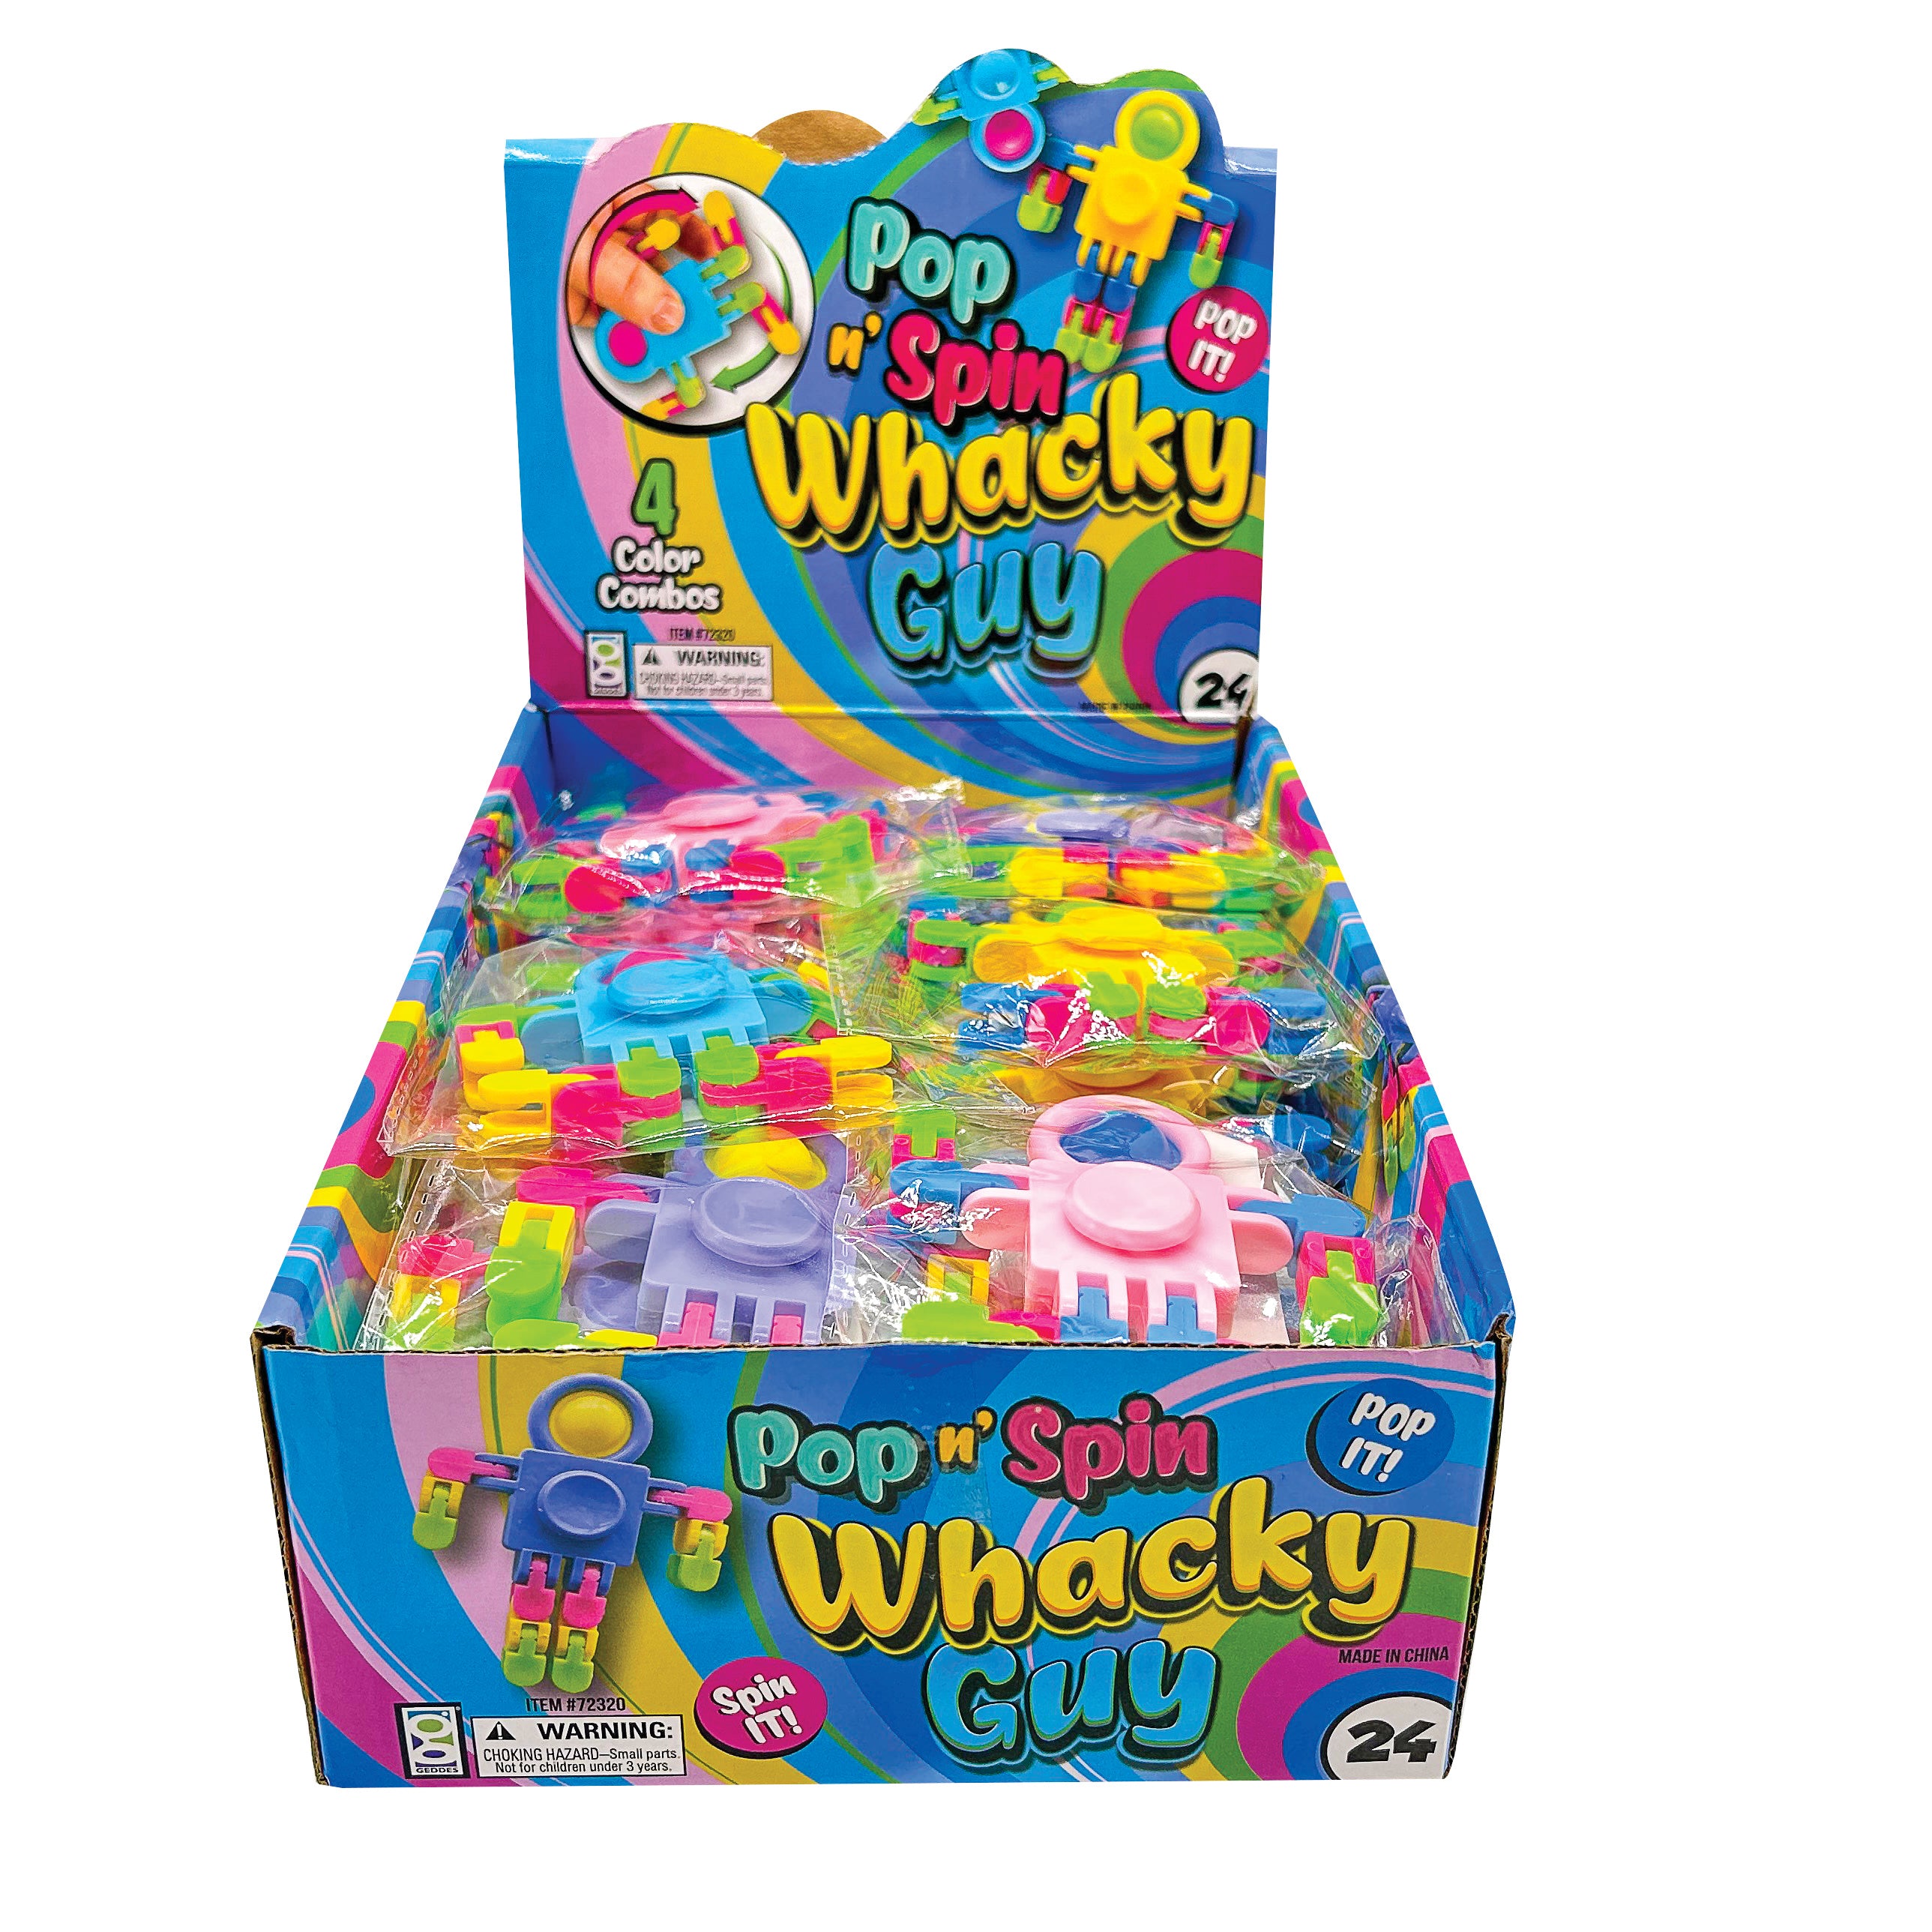 Pop ‘n’ Spin Whacky Guy Toys